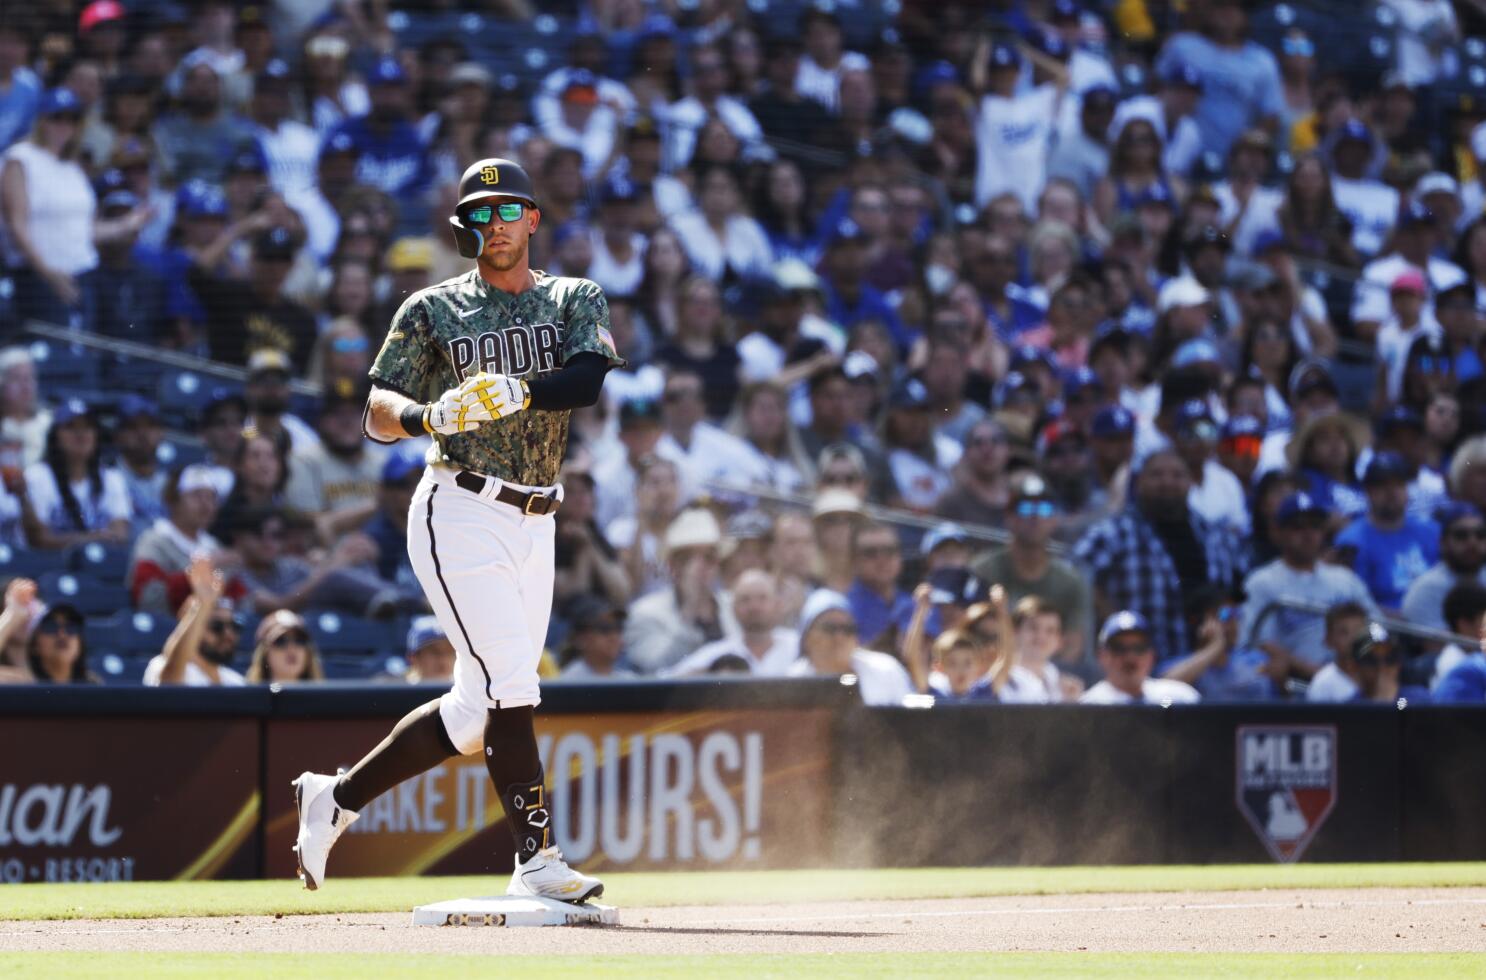 MLB: New York Yankees earn ugly, lopsided win over Oakland A's